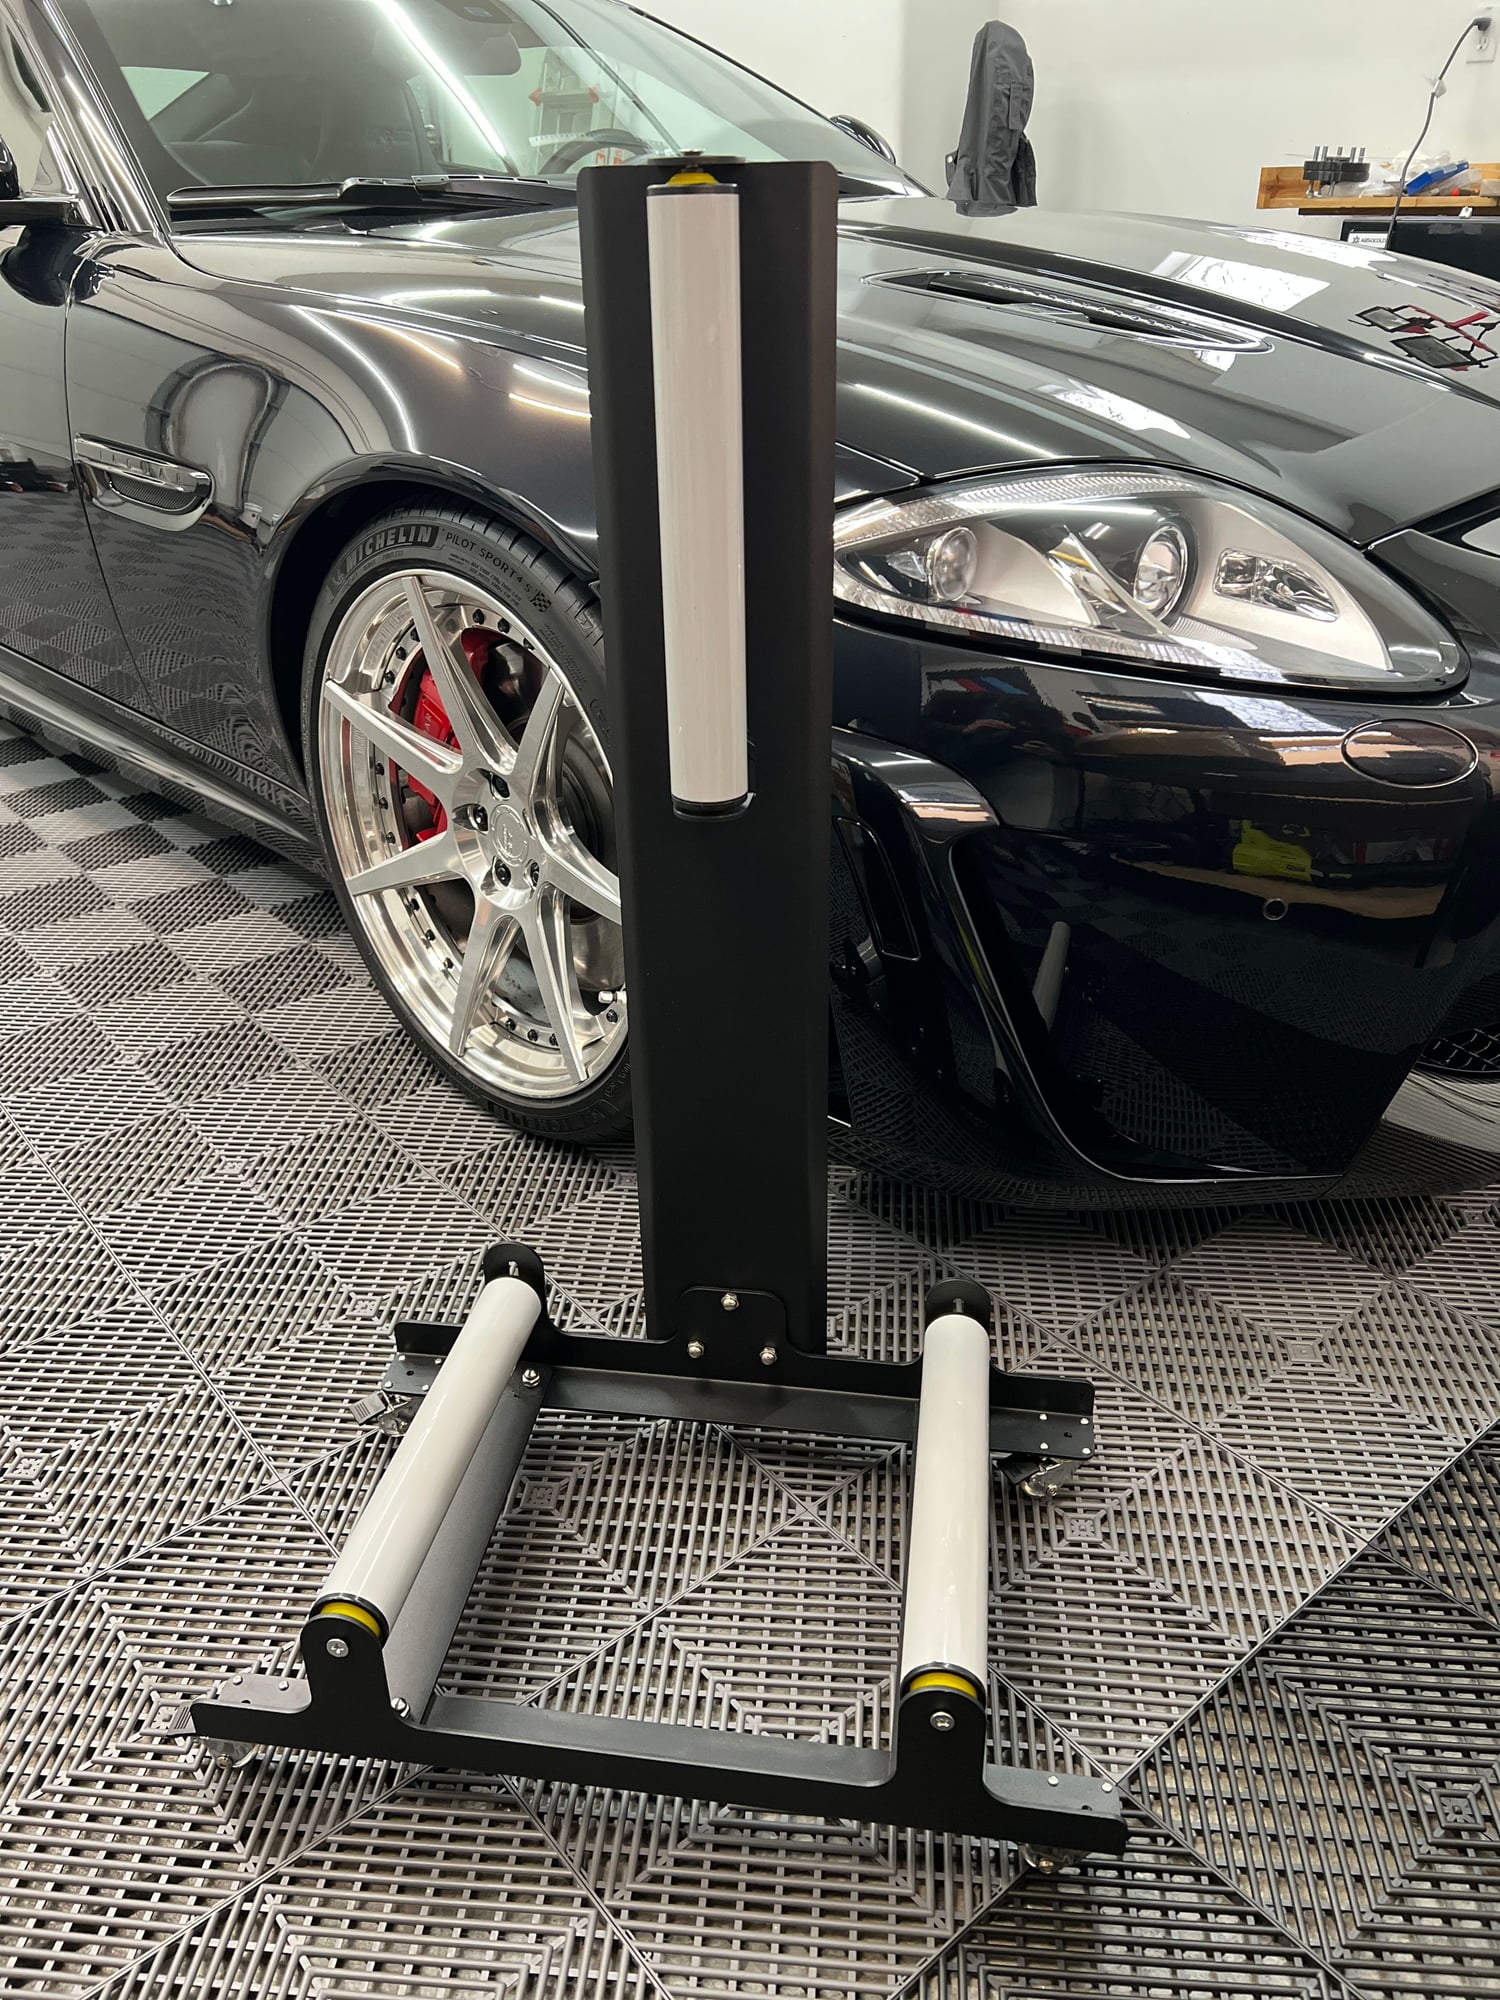 Steering/Suspension - [New in Box] Wheel & Tire Car Detailing Stand for Cleaning, Detailing, and Polishing - New - 0  All Models - Pleasanton, CA 94566, United States